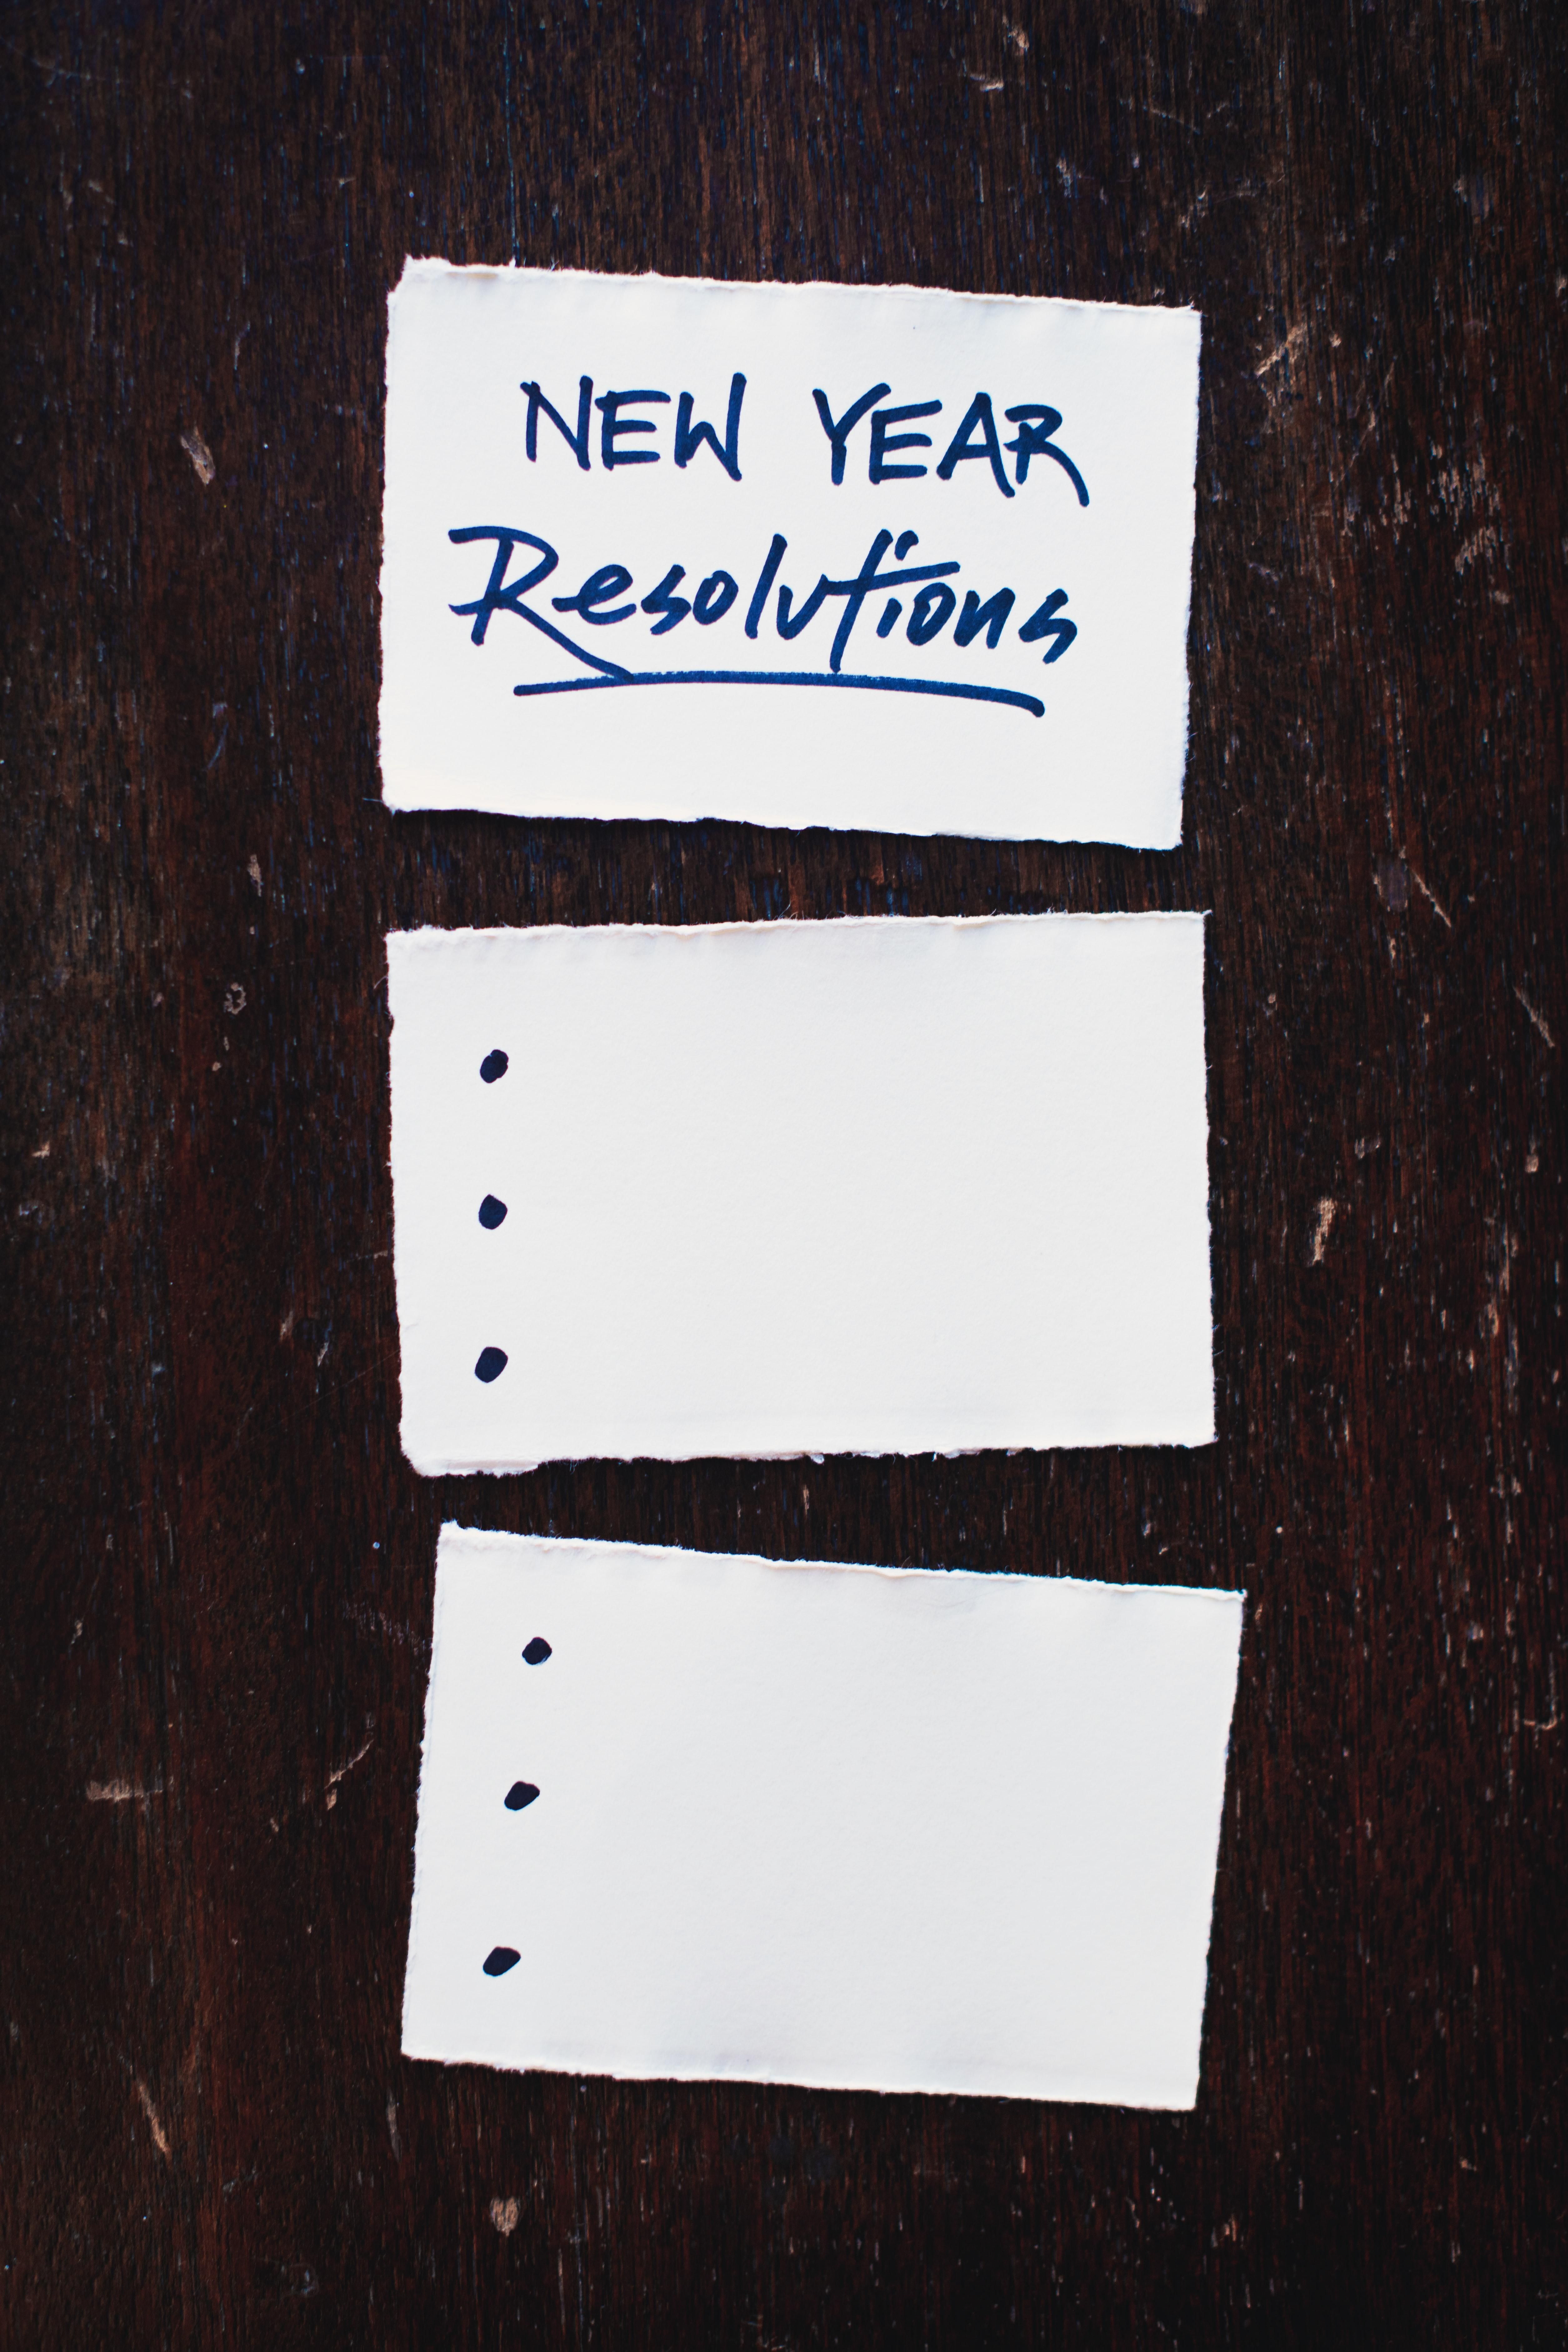 My Take On New Year's Resolutions